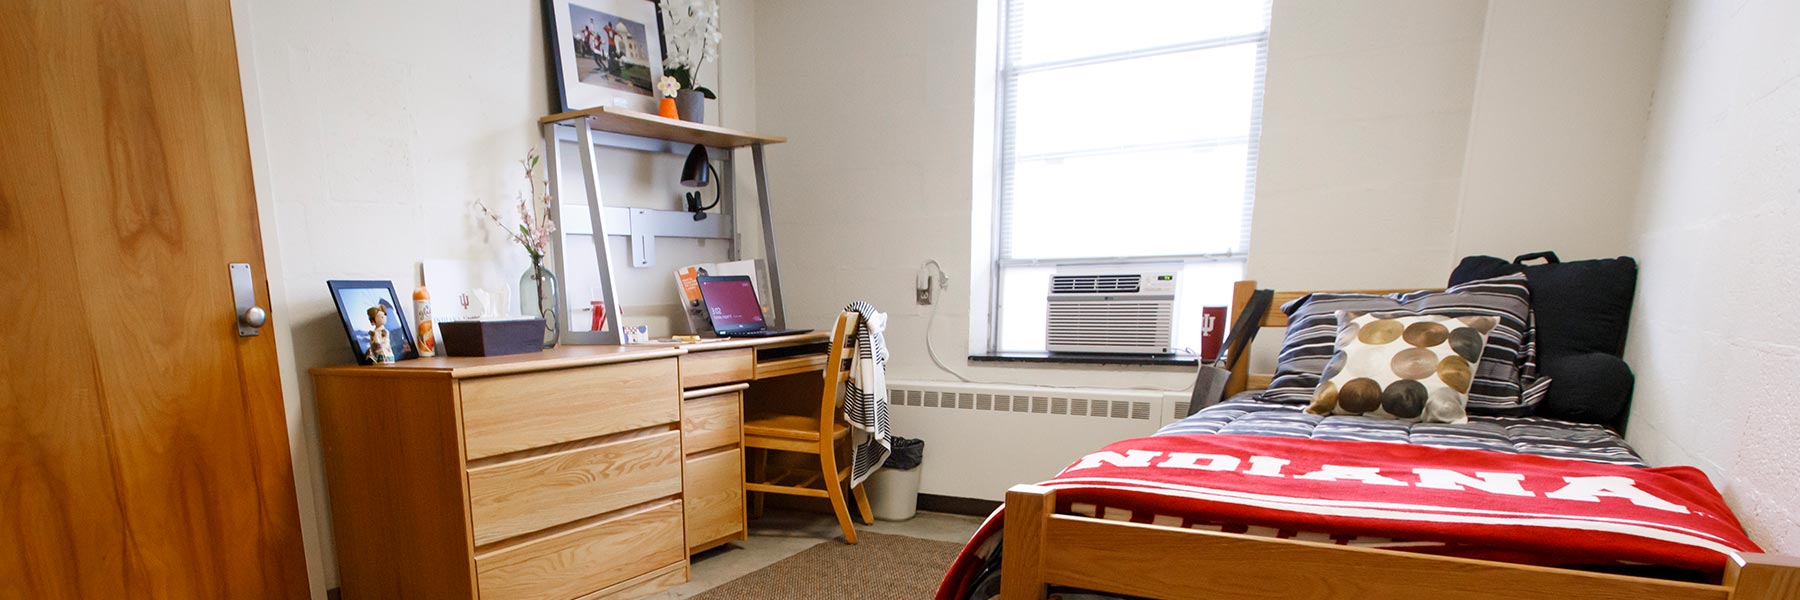 View into a student housing room with bed, desk, chair and other items.